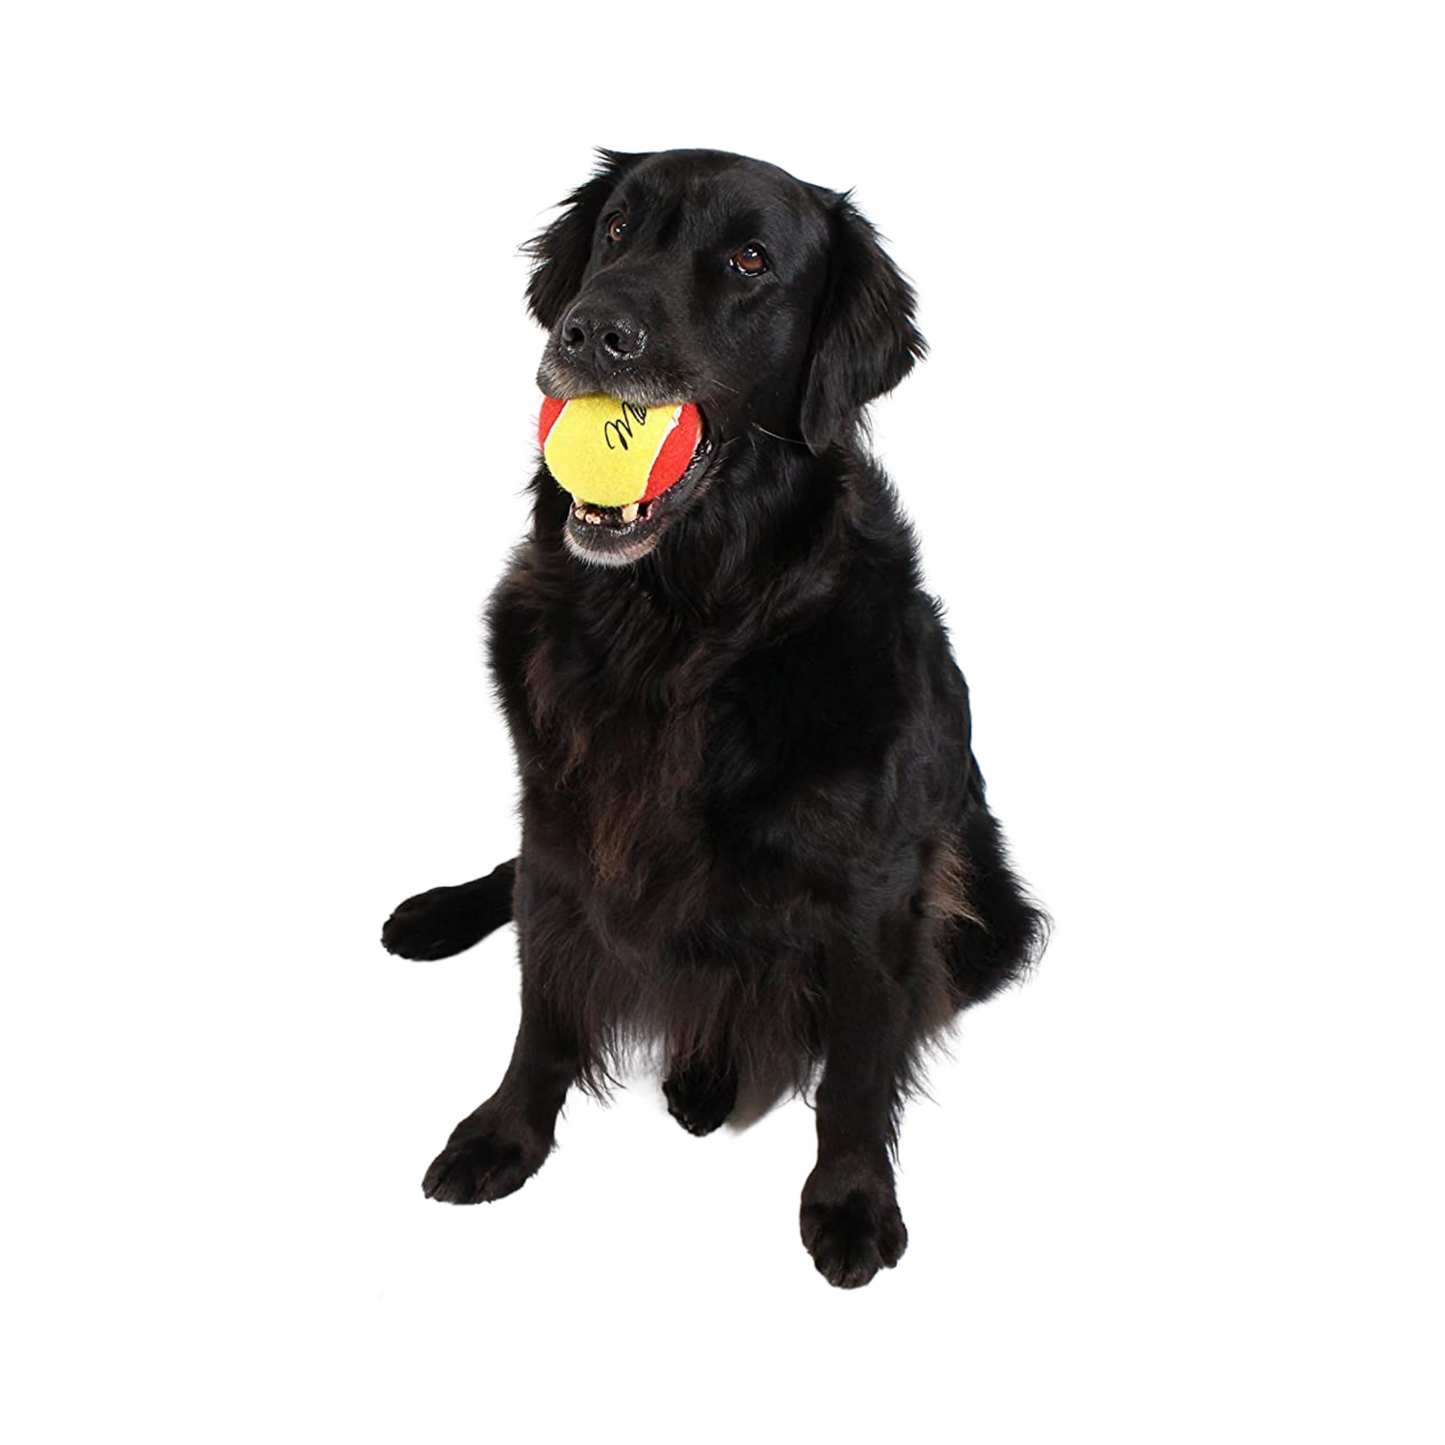 Midlee 3 Inch Large Tennis Balls for Dogs, Pack of 4 Durable Toy Balls